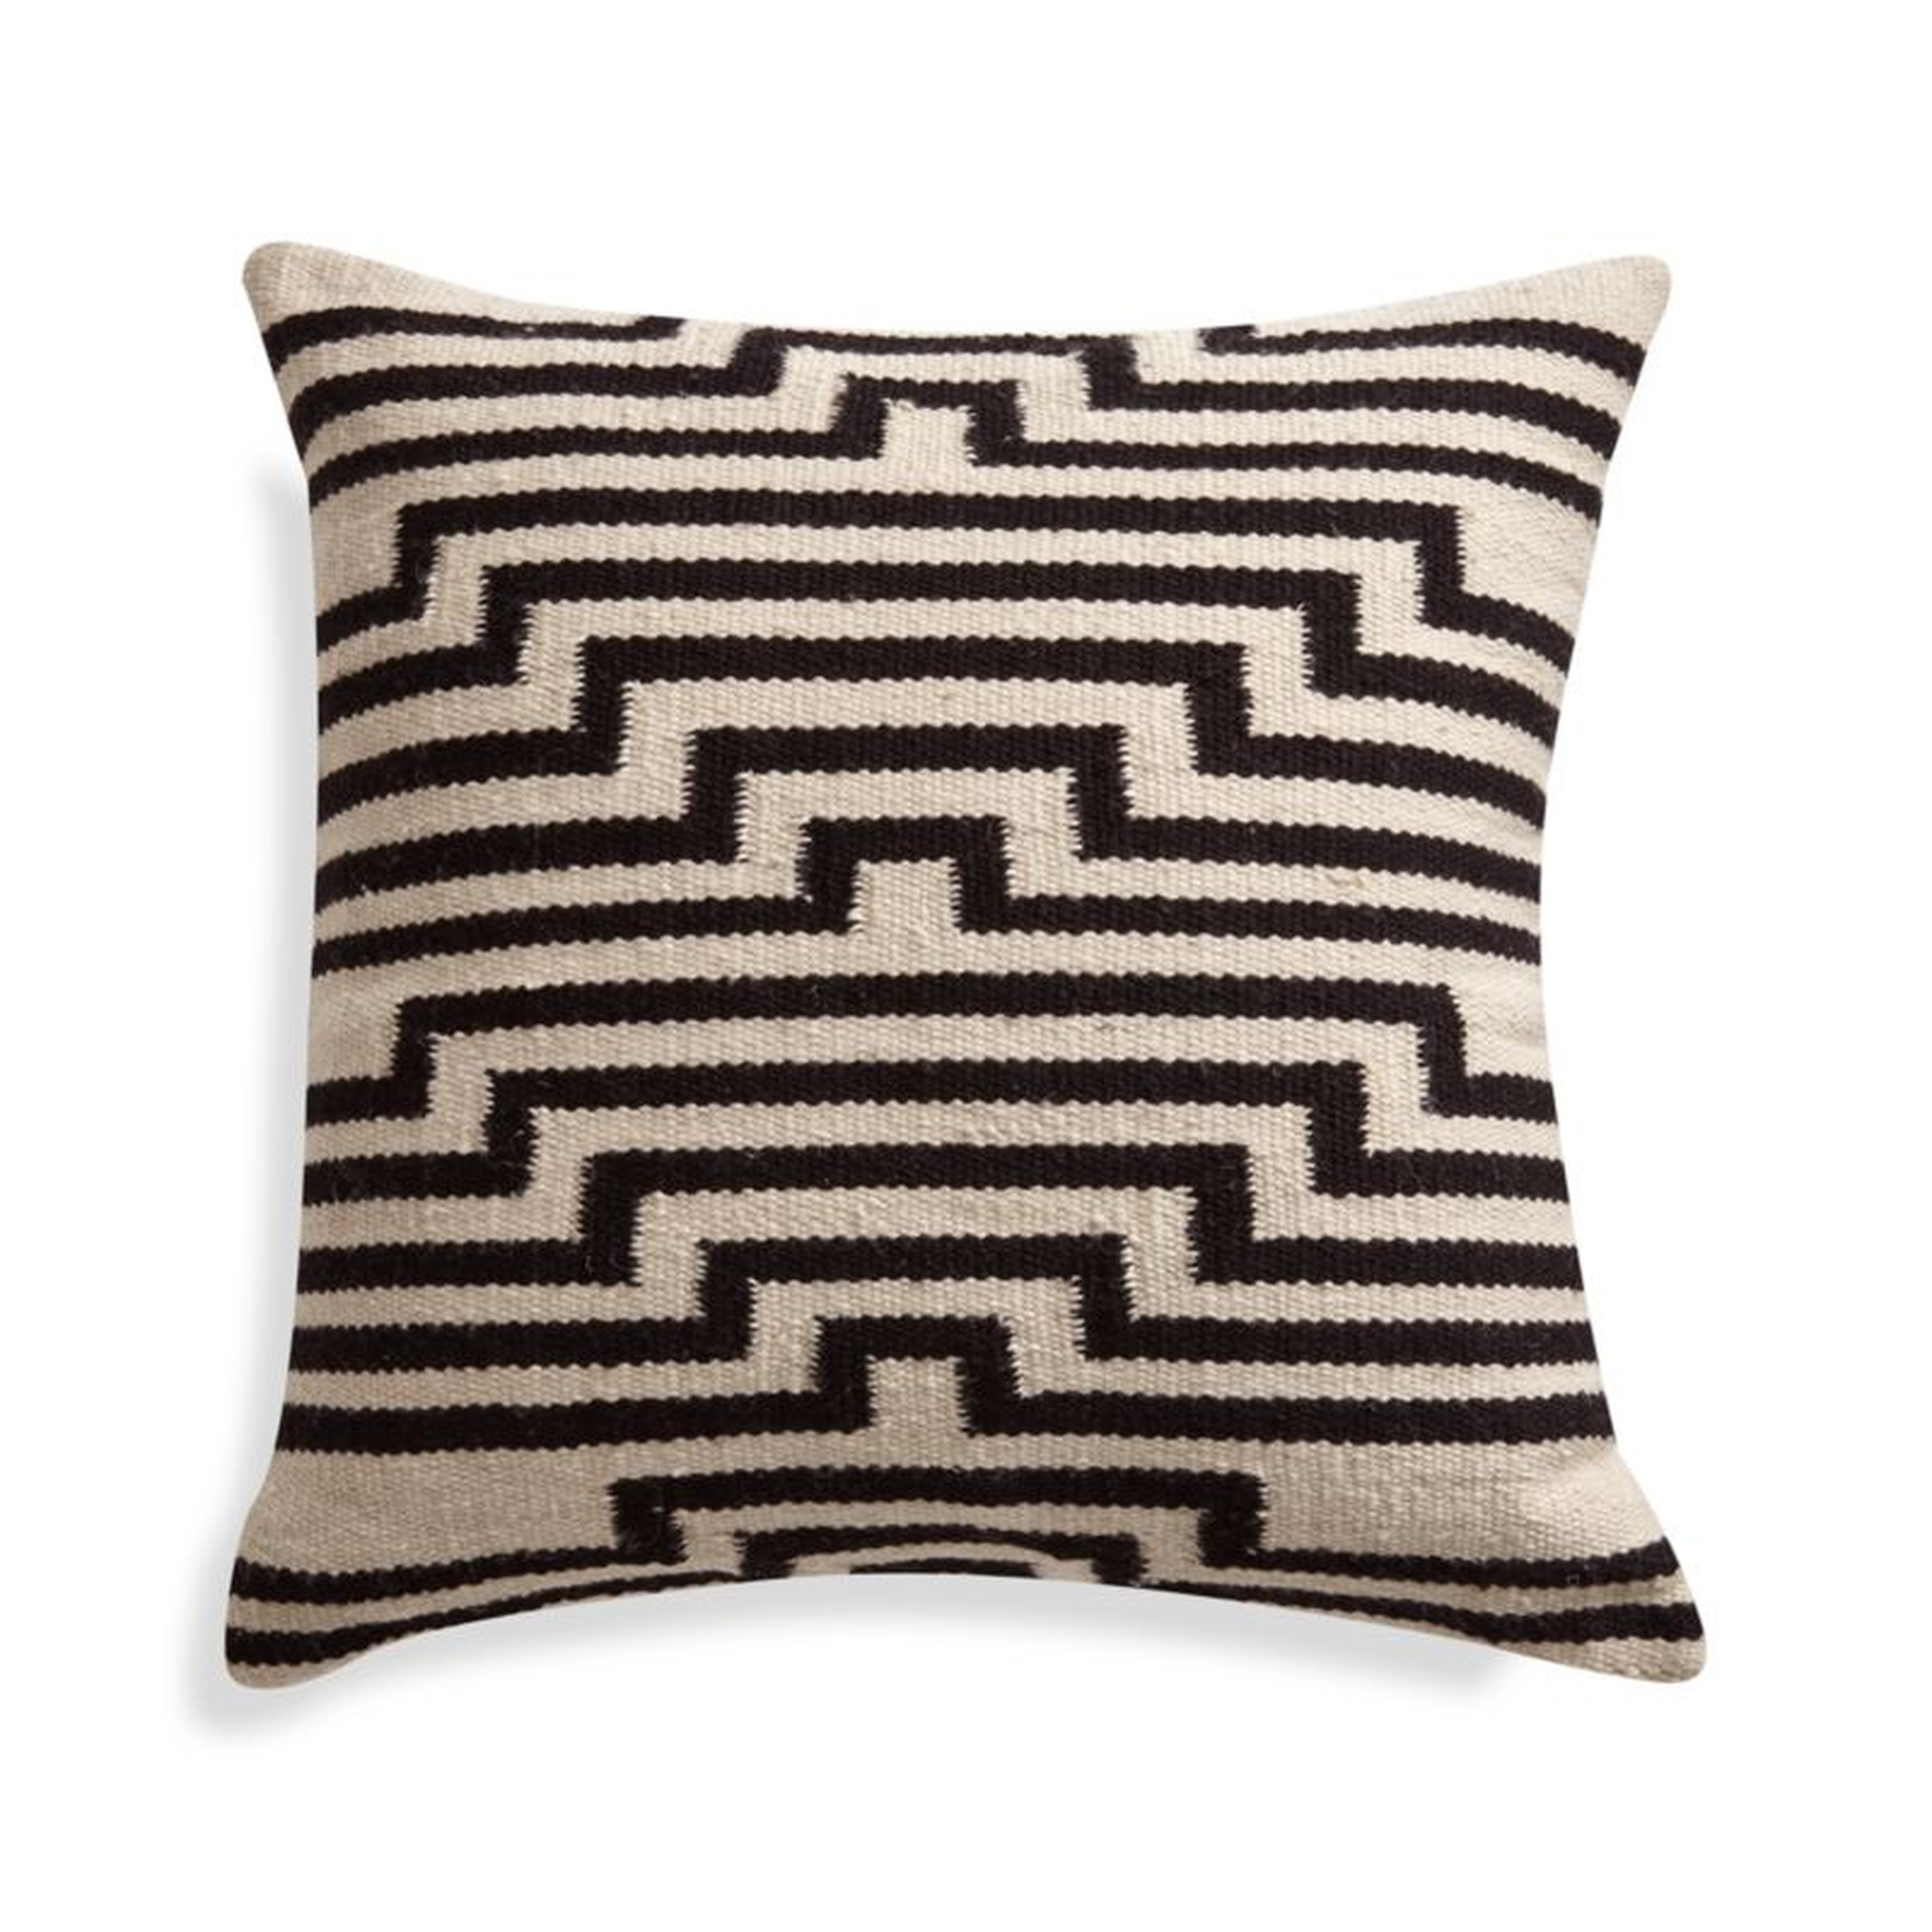 Mohave Lines 19"x19" Indoor/Outdoor Pillow - Crate and Barrel